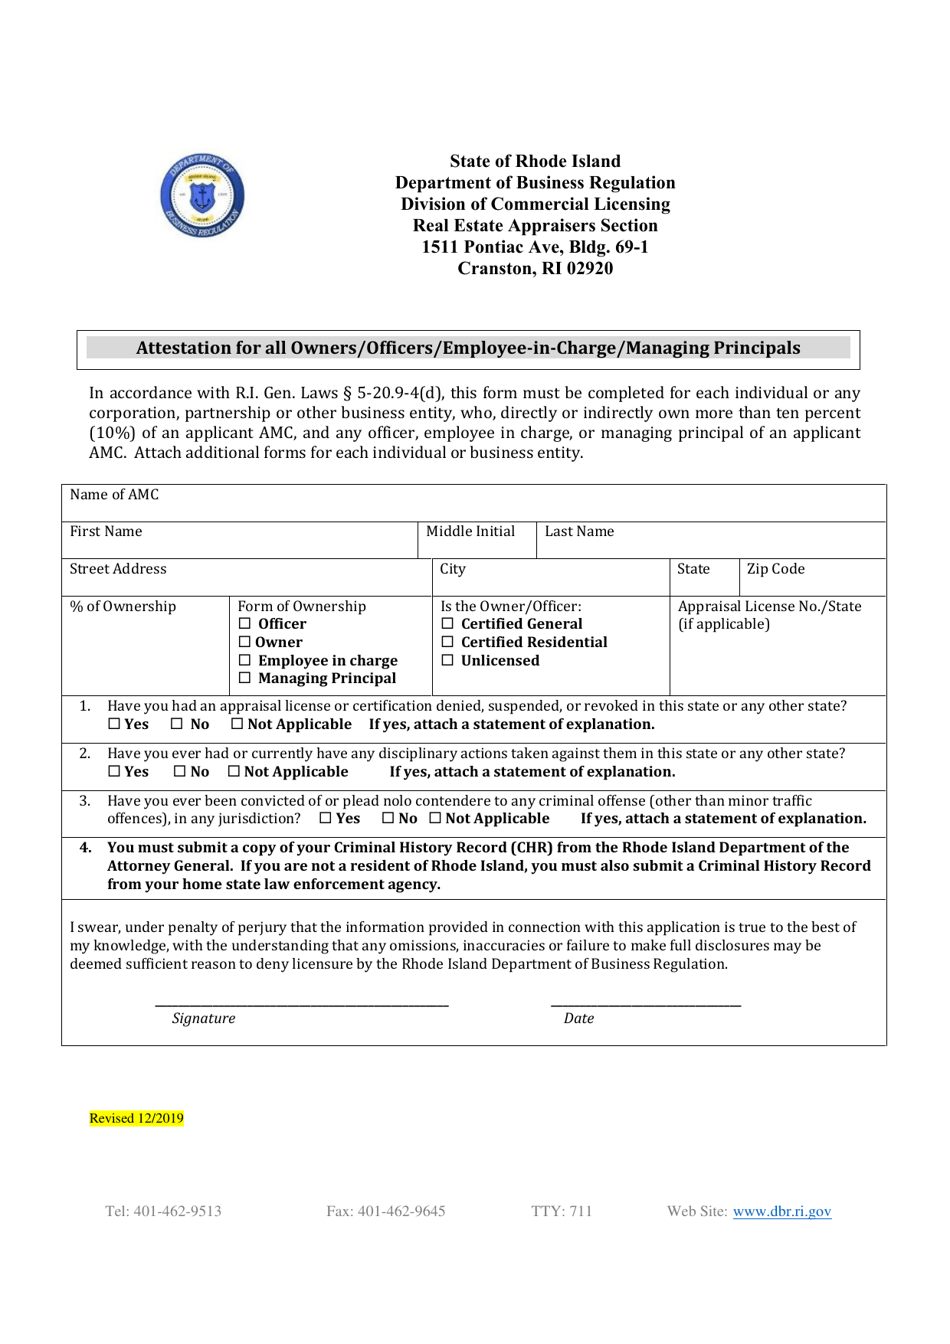 Attestation for All Owners / Officers / Employee-In-charge / Managing Principals - Rhode Island, Page 1